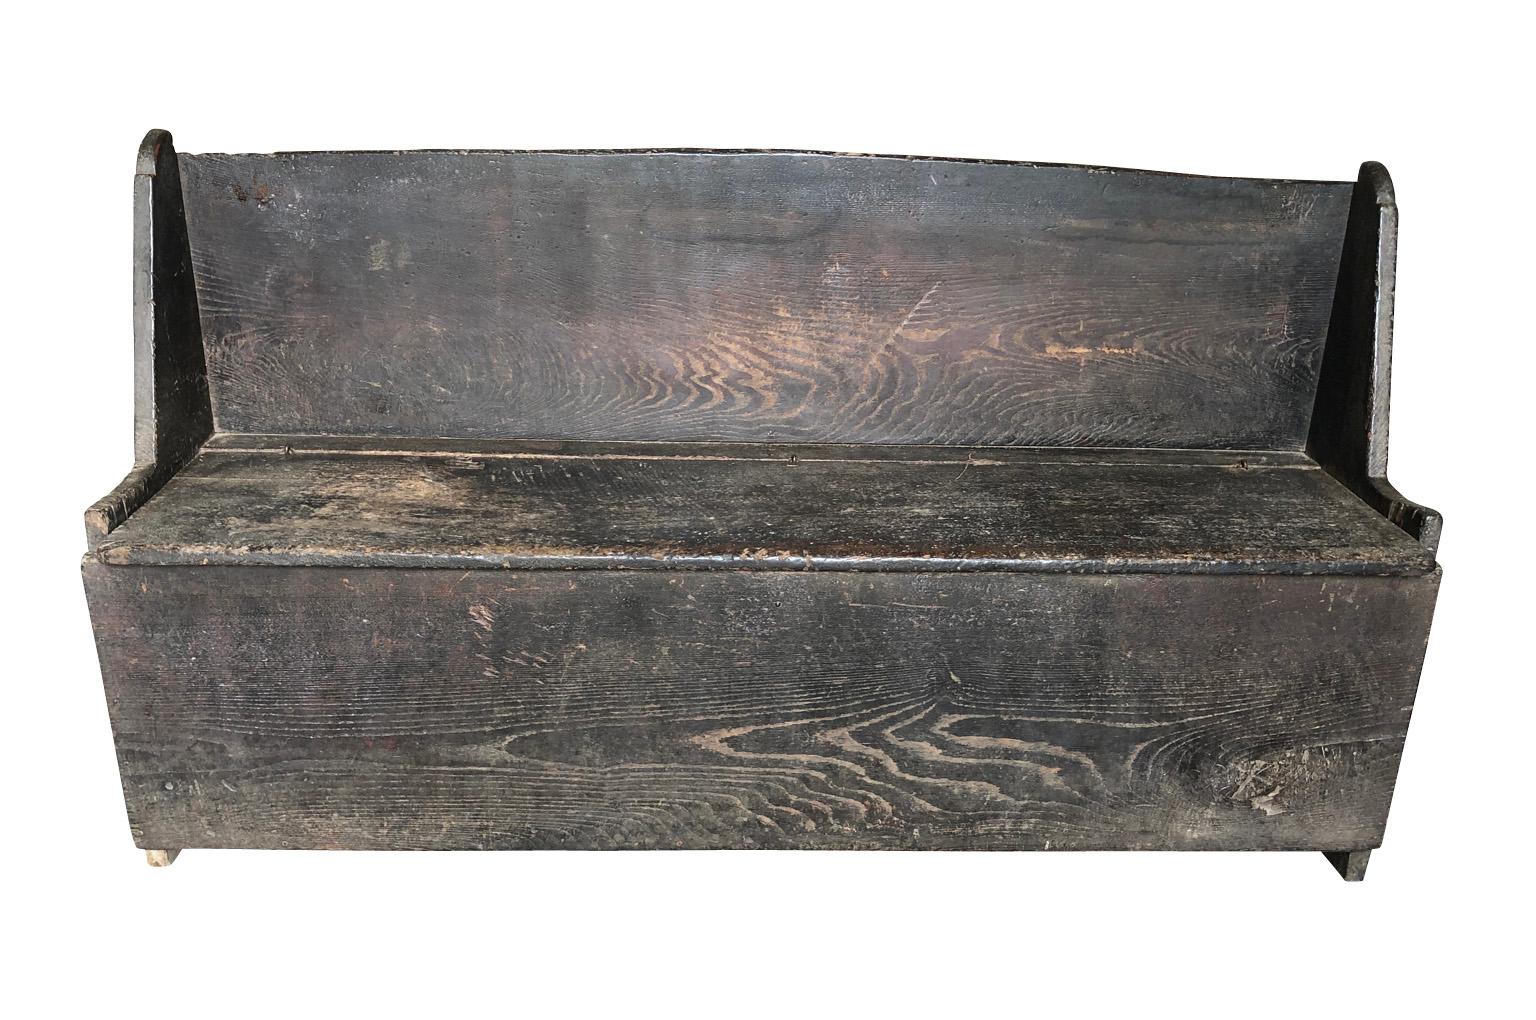 A very handsome primitive 18th century bench, trunk from the Catalan region of Spain. Soundly constructed from beautiful chestnut with very minimalists lines. The seat lifts to expose storage space. Great patina.